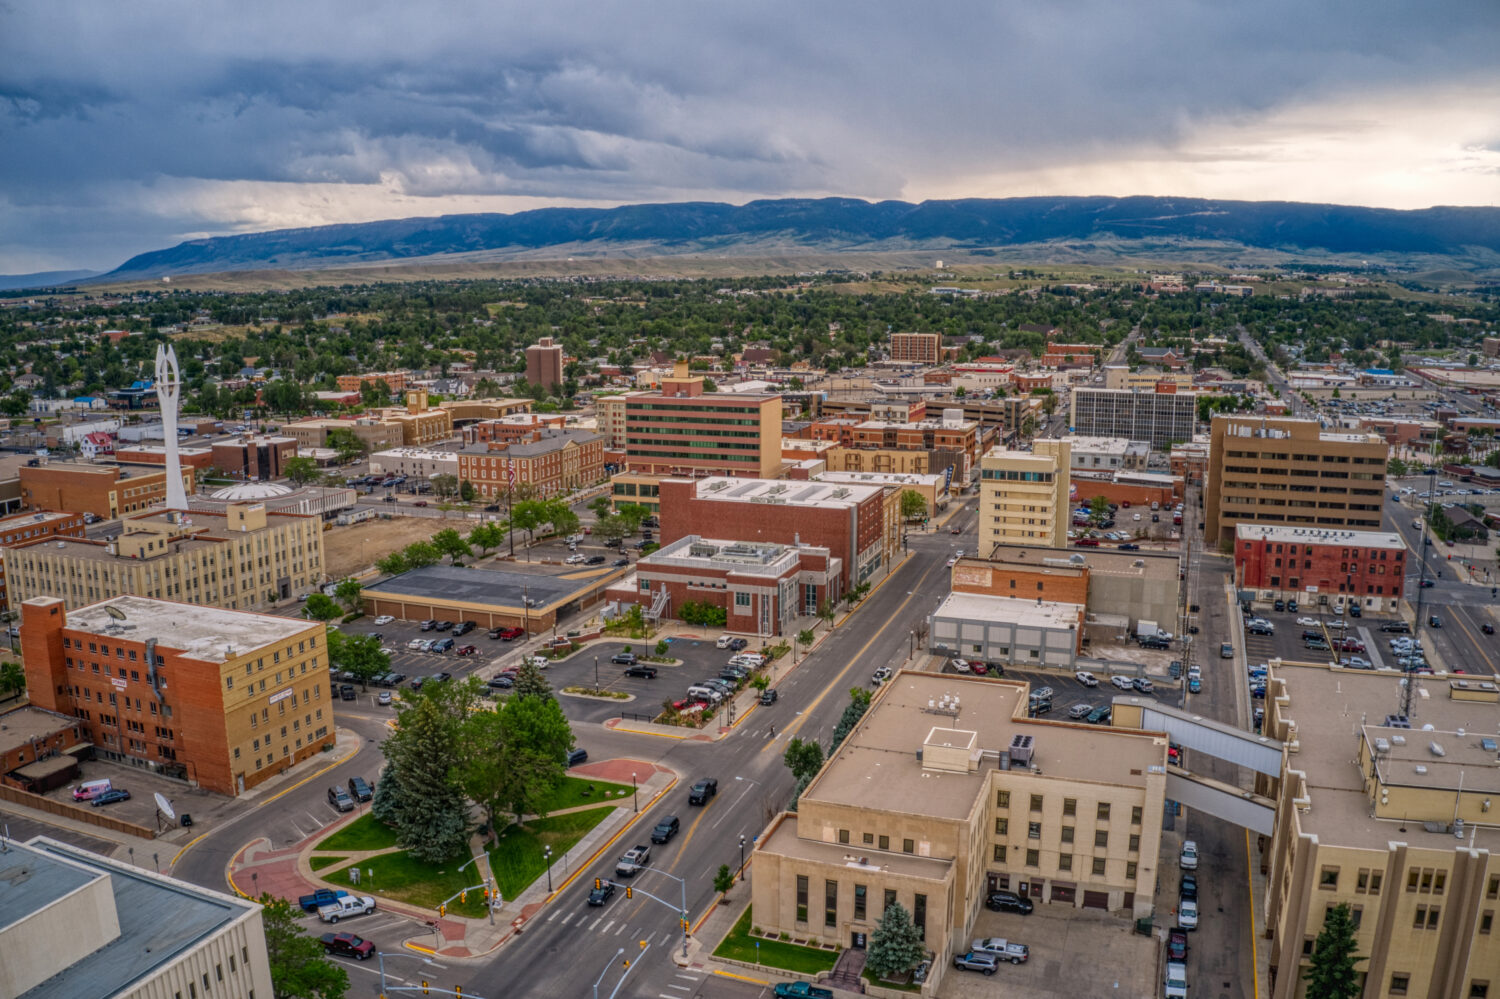 Casper earned the nickname “The Oil City” for its long history as an oil boomtown. <a>©Jacob Boomsma/Shutterstock.com</a>